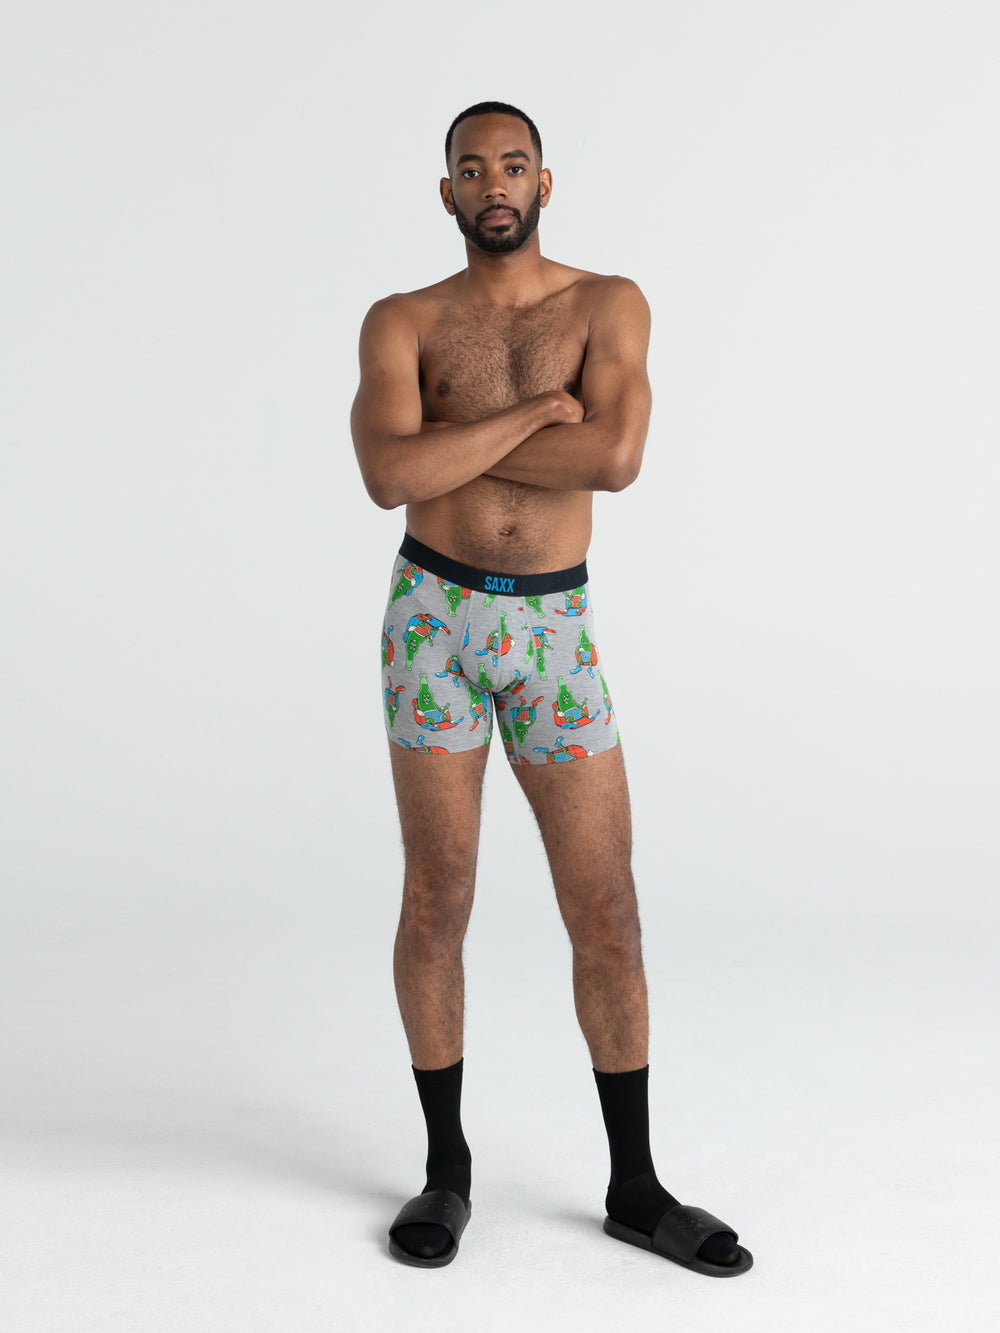 SAXX VIBE BOXER BRIEF - PANTS DRUNK - CLEARANCE